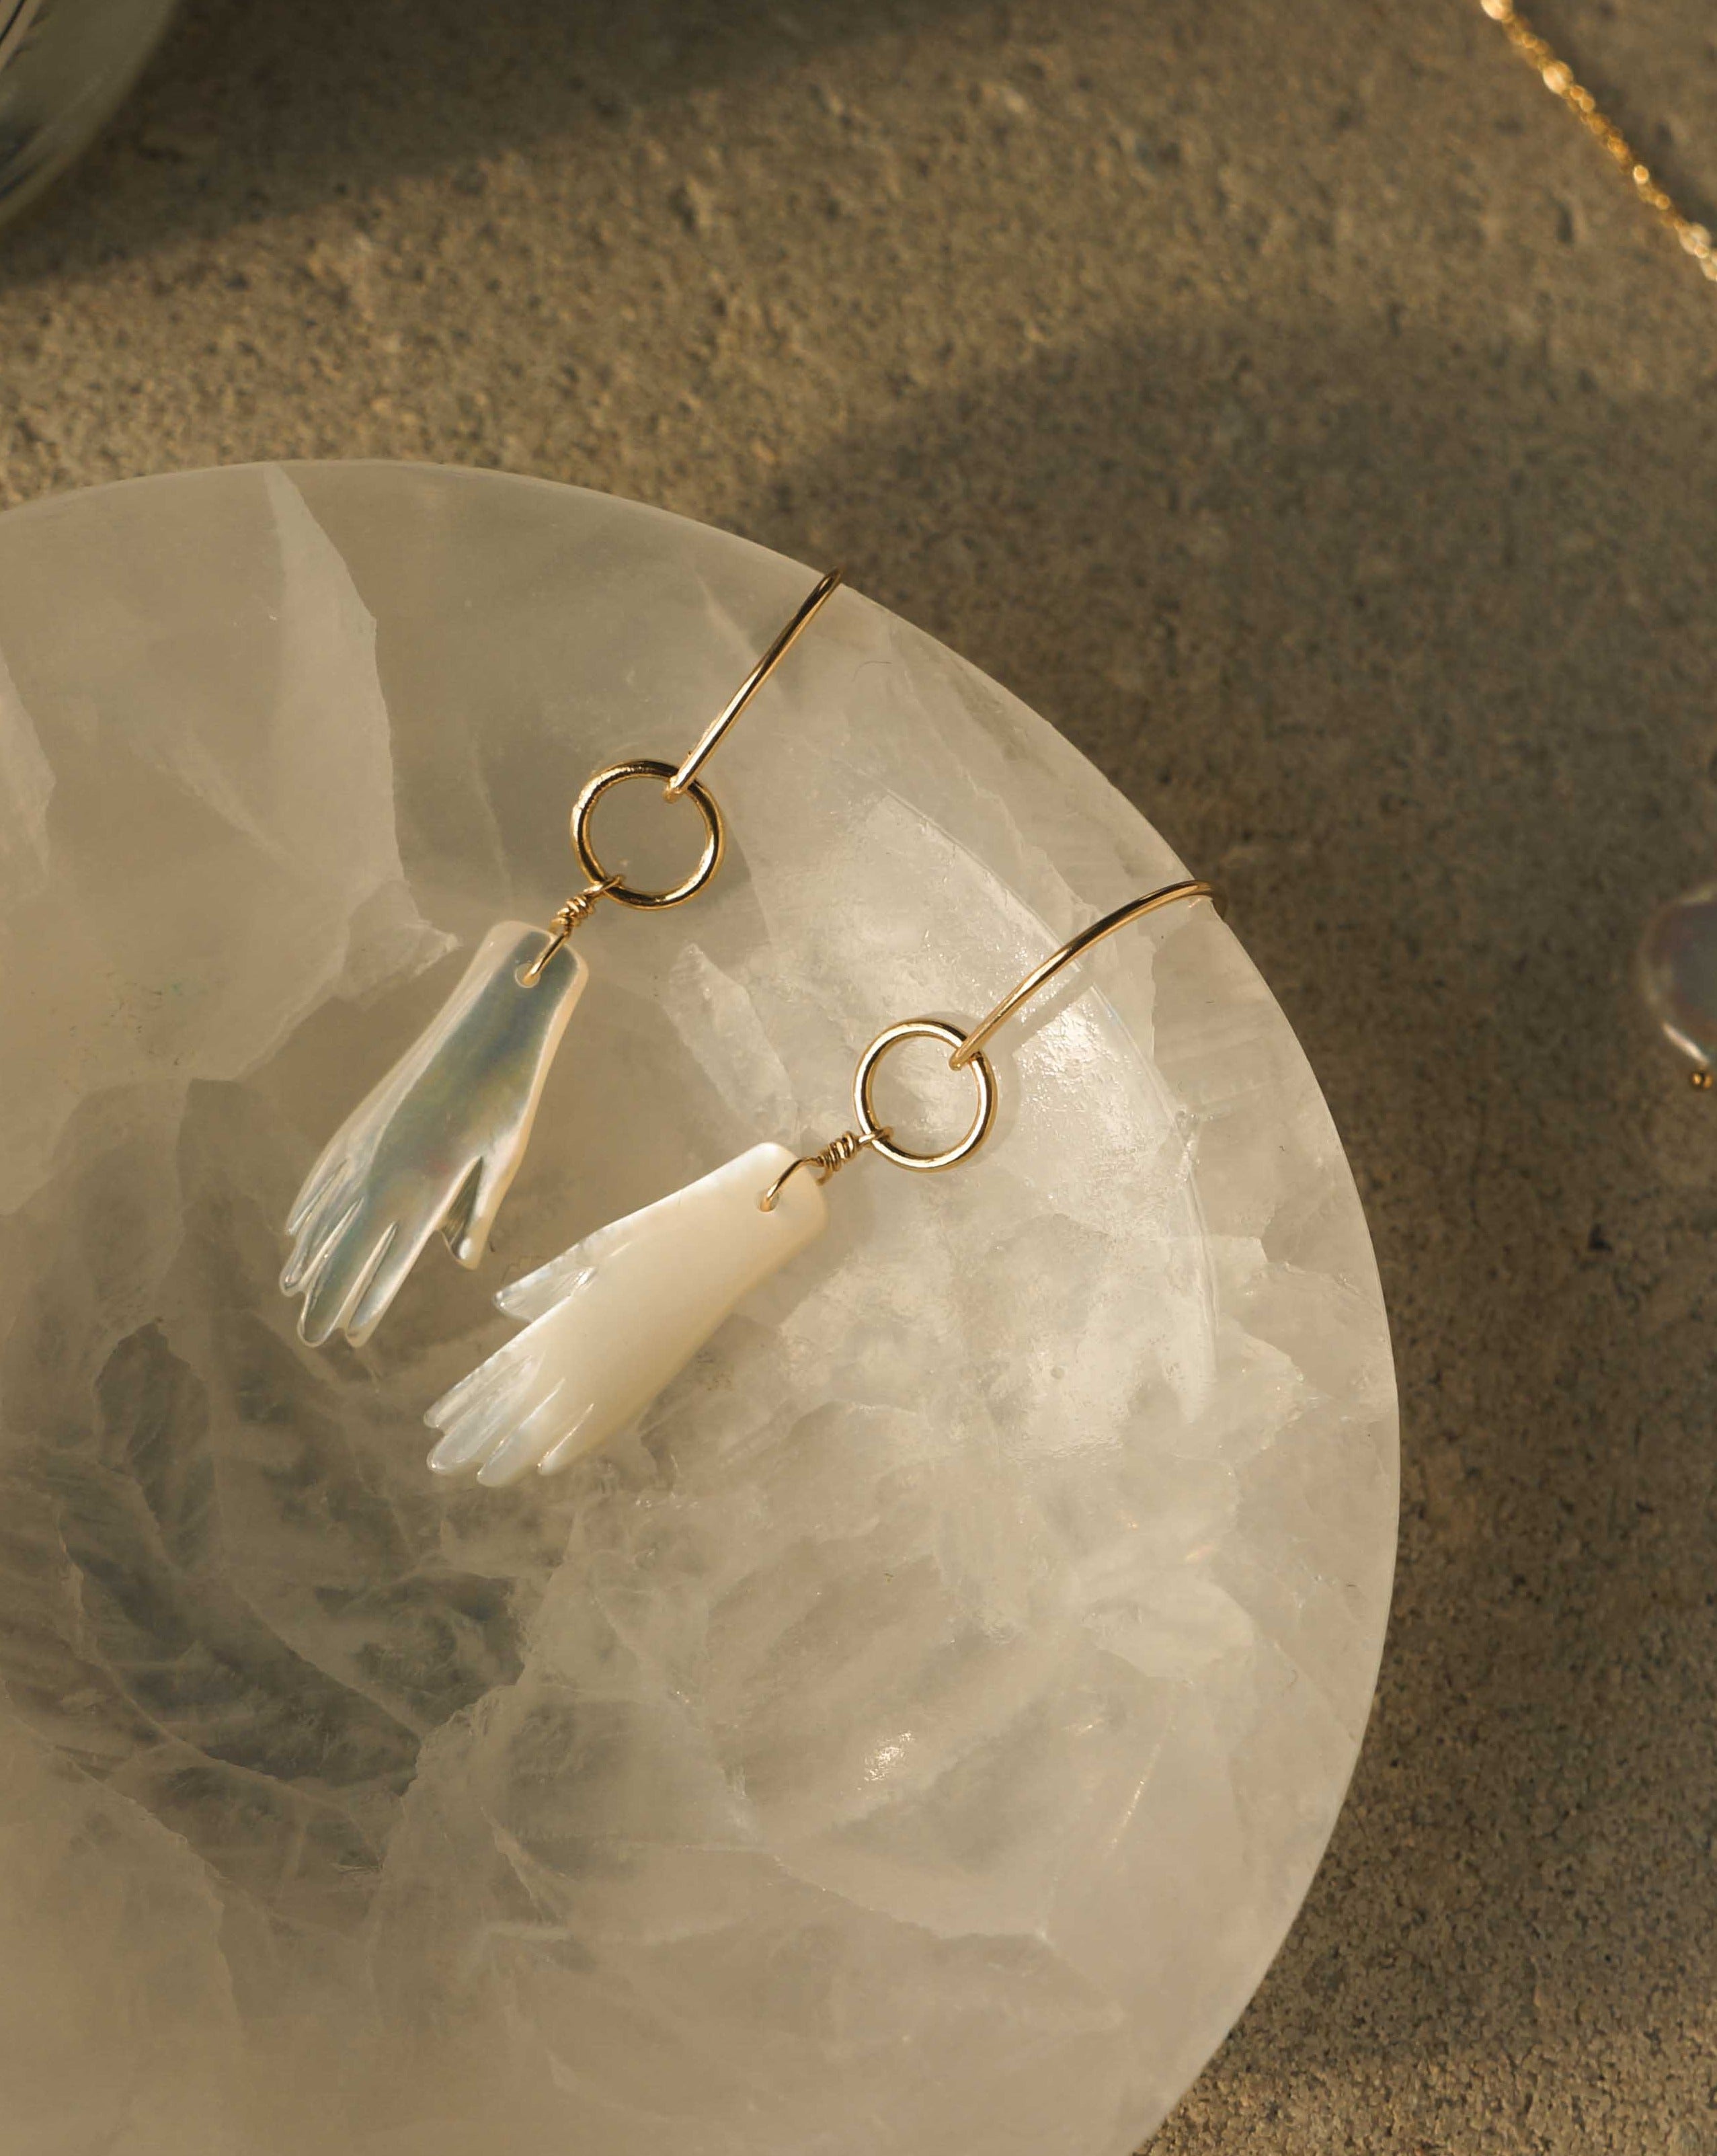 Manos Hoop Earrings by KOZAKH. Hook earrings crafted in 14K Gold Filled, featuring a hand carved Mother of Pearl hand.